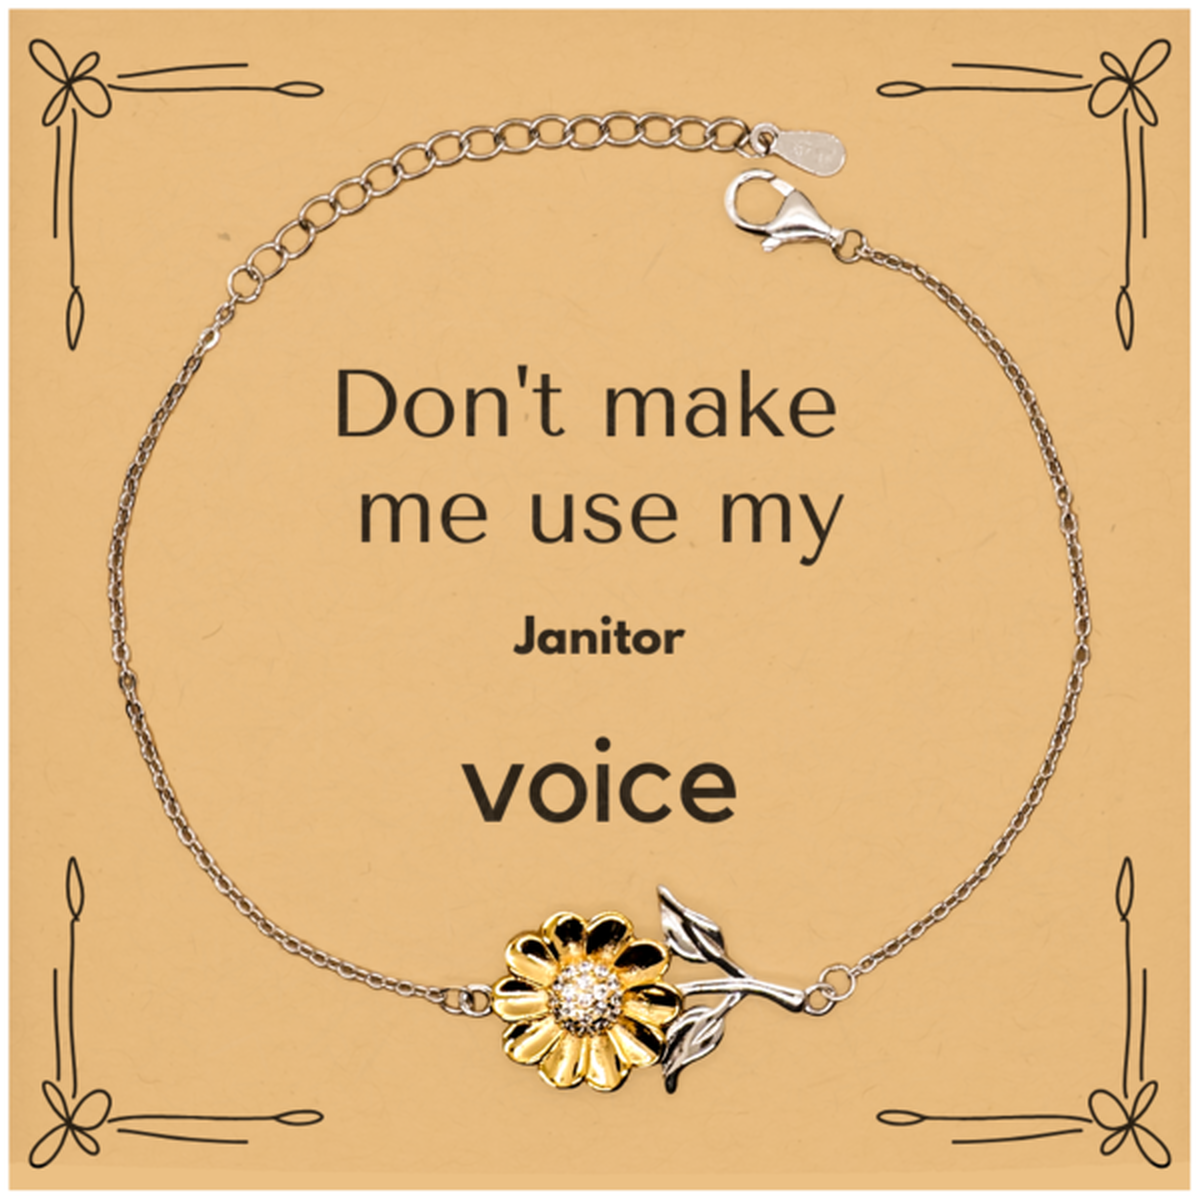 Don't make me use my Janitor voice, Sarcasm Janitor Card Gifts, Christmas Janitor Sunflower Bracelet Birthday Unique Gifts For Janitor Coworkers, Men, Women, Colleague, Friends